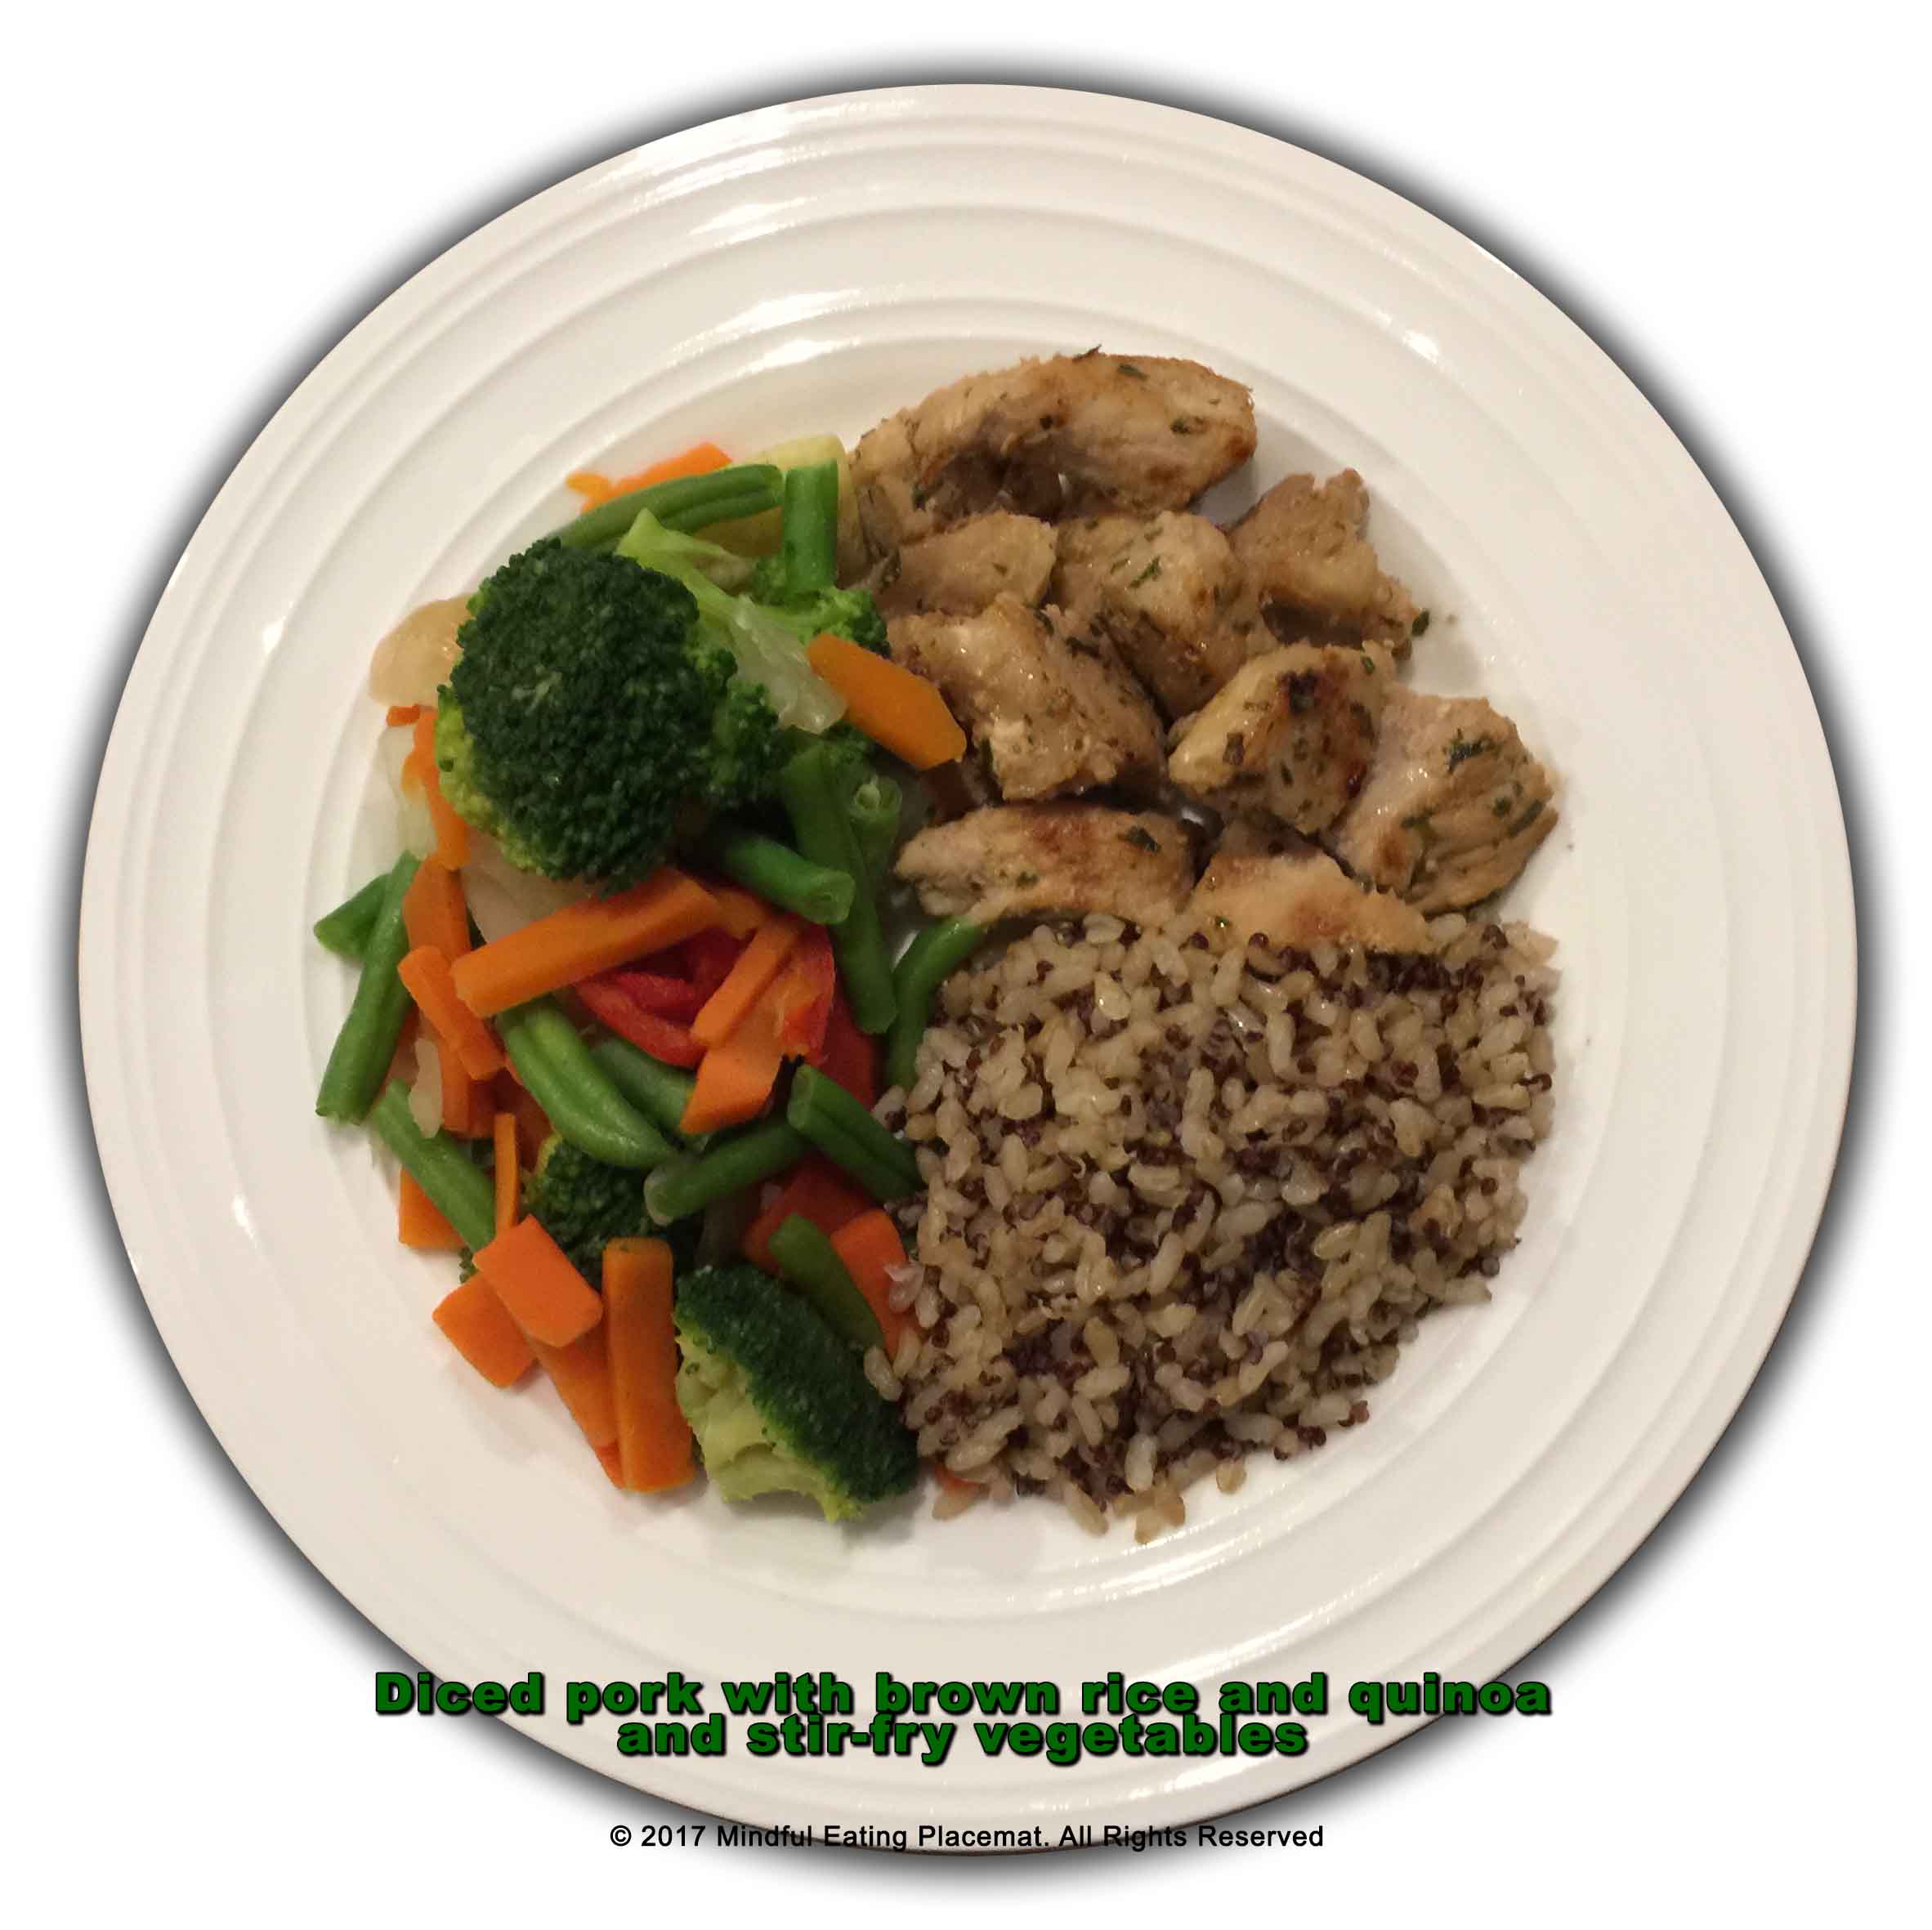 Diced pork with brown rice and quinoa and stir-fry vegetables